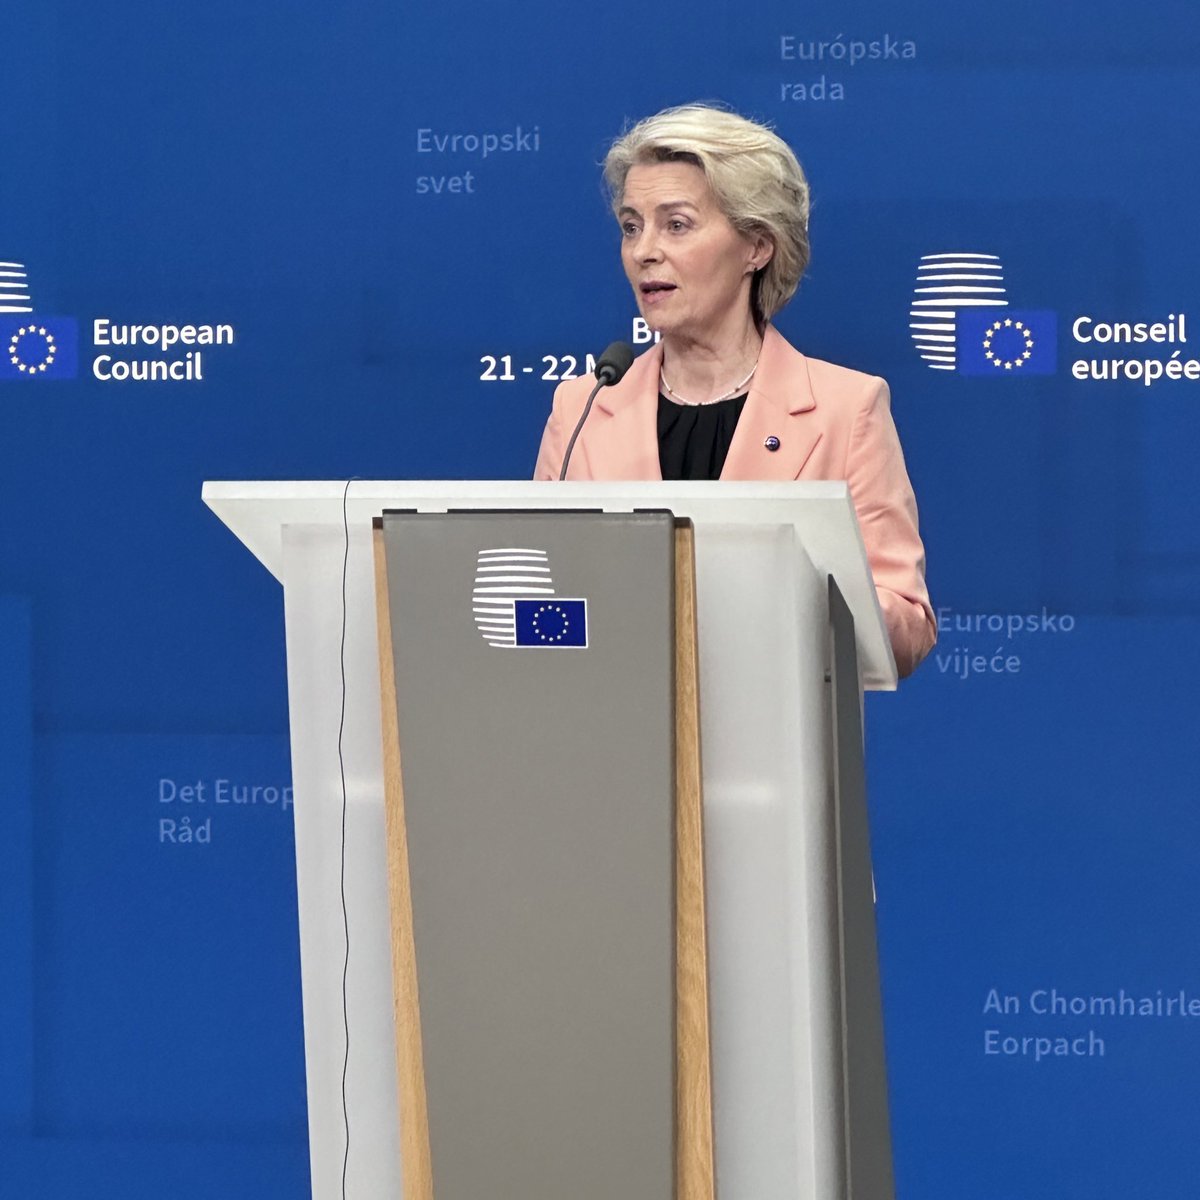 EU Commission President Ursula von der Leyen says the first billion of windfall profits (around €3bln) on frozen Russian assets could be released as early as July 1st.   EU leaders have agreed to move forward on using the money to support Ukraine